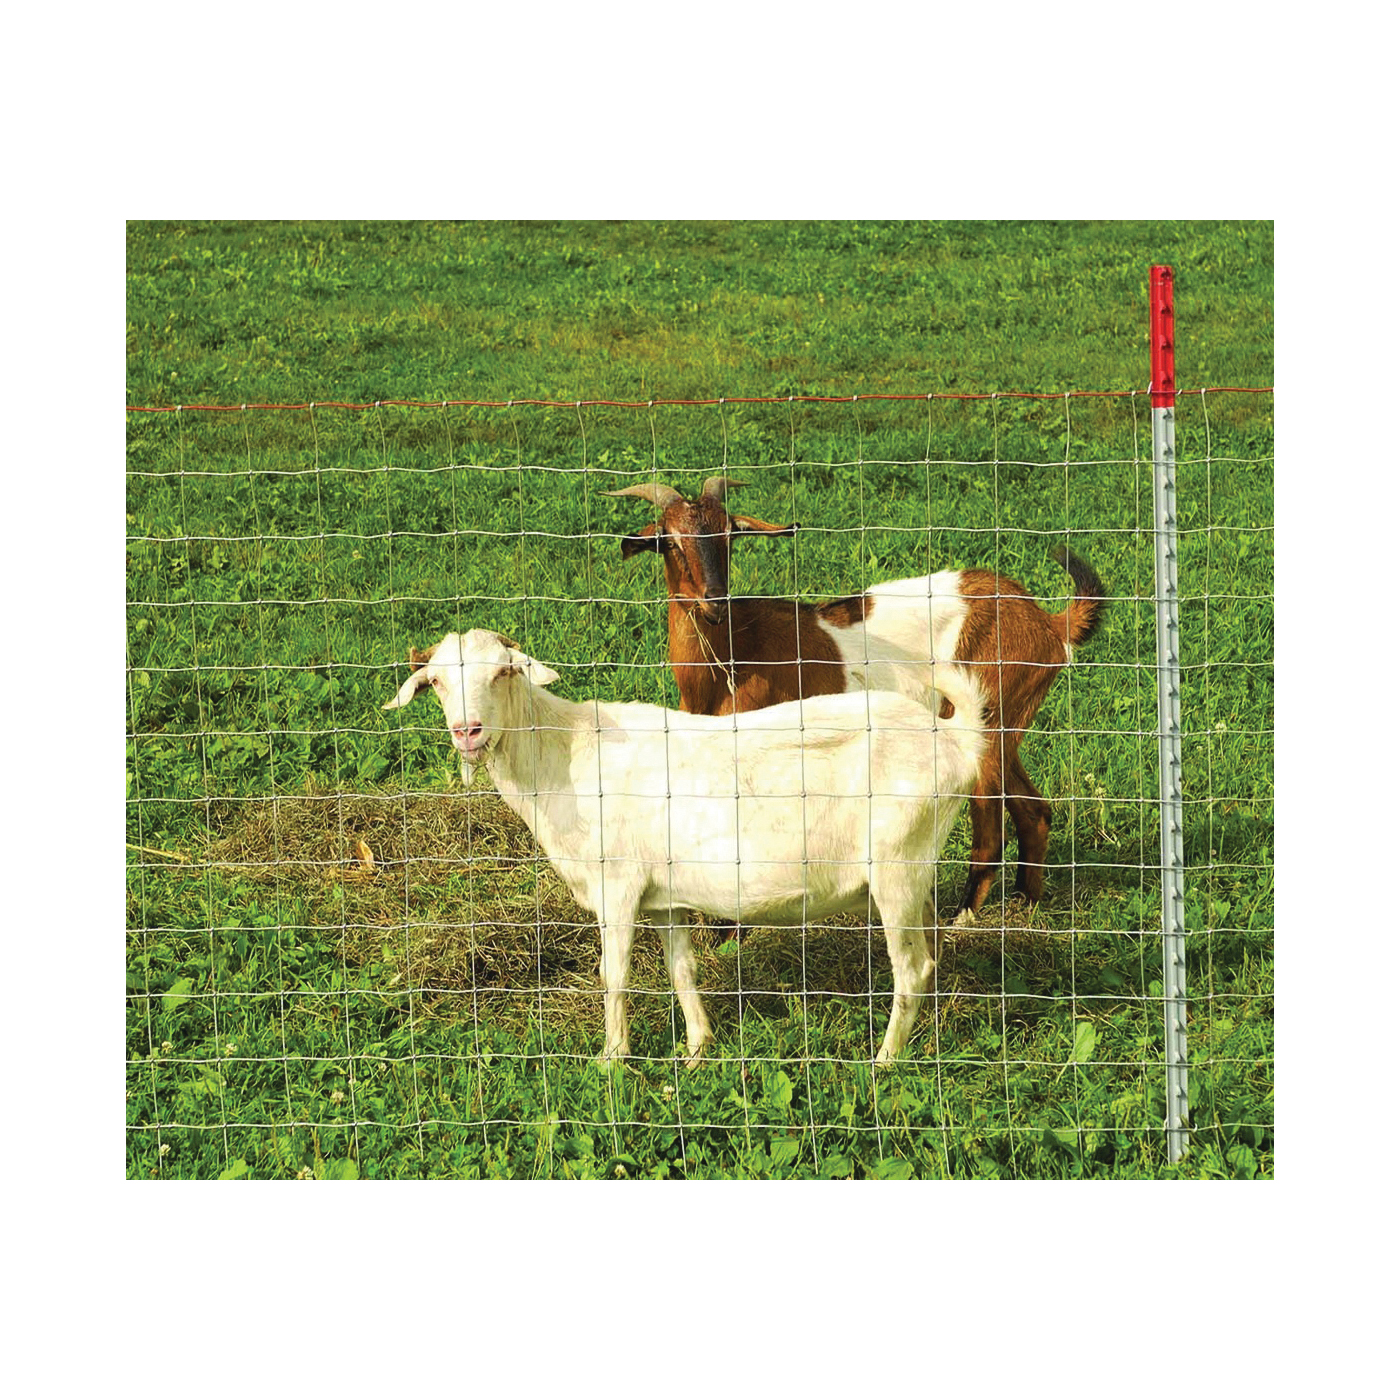 Square Deal 70315 Sheep and Goat Fence, 330 ft L, 48 in H, 4 x 4 in Mesh, 12-1/2 Gauge, Galvanized